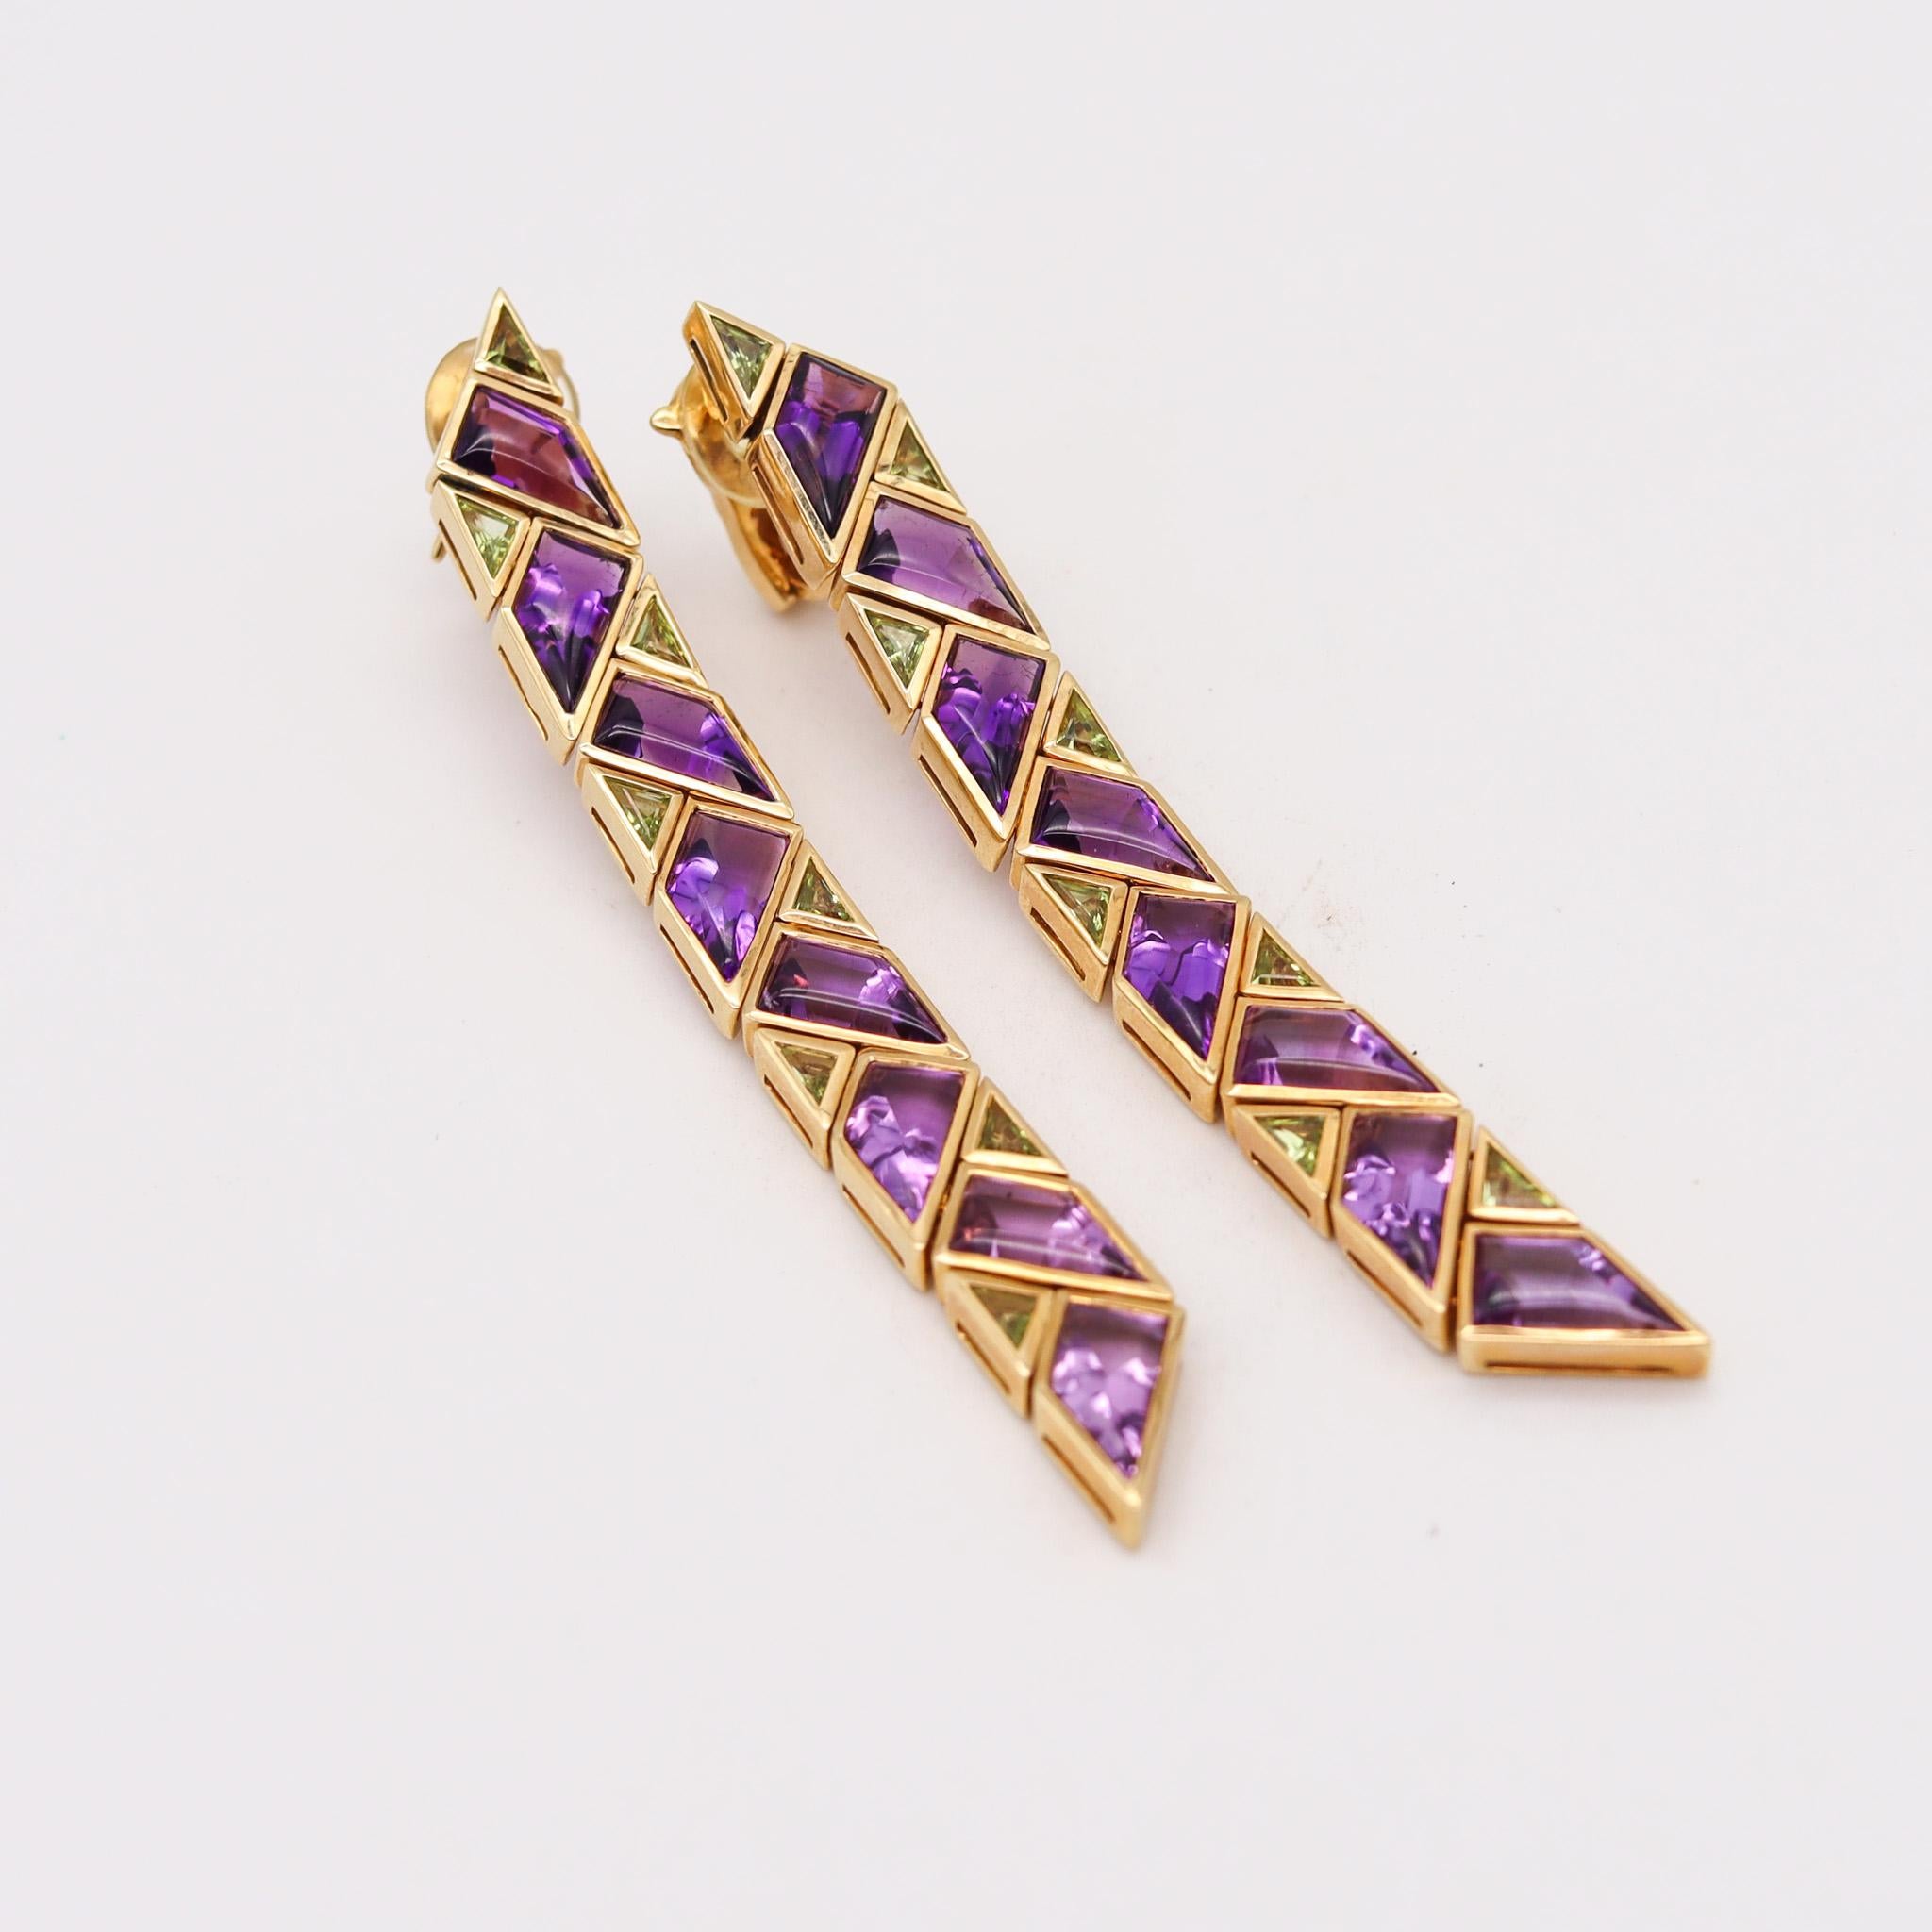 Pyramide dangle earrings designed by Marina B.

Beautiful vintage earrings made in Milano Italy by the iconic Marina Bvlgari, back in the 1989. This dangle drop pair is from the highly collectable Pyramide collection carefully crafted in solid